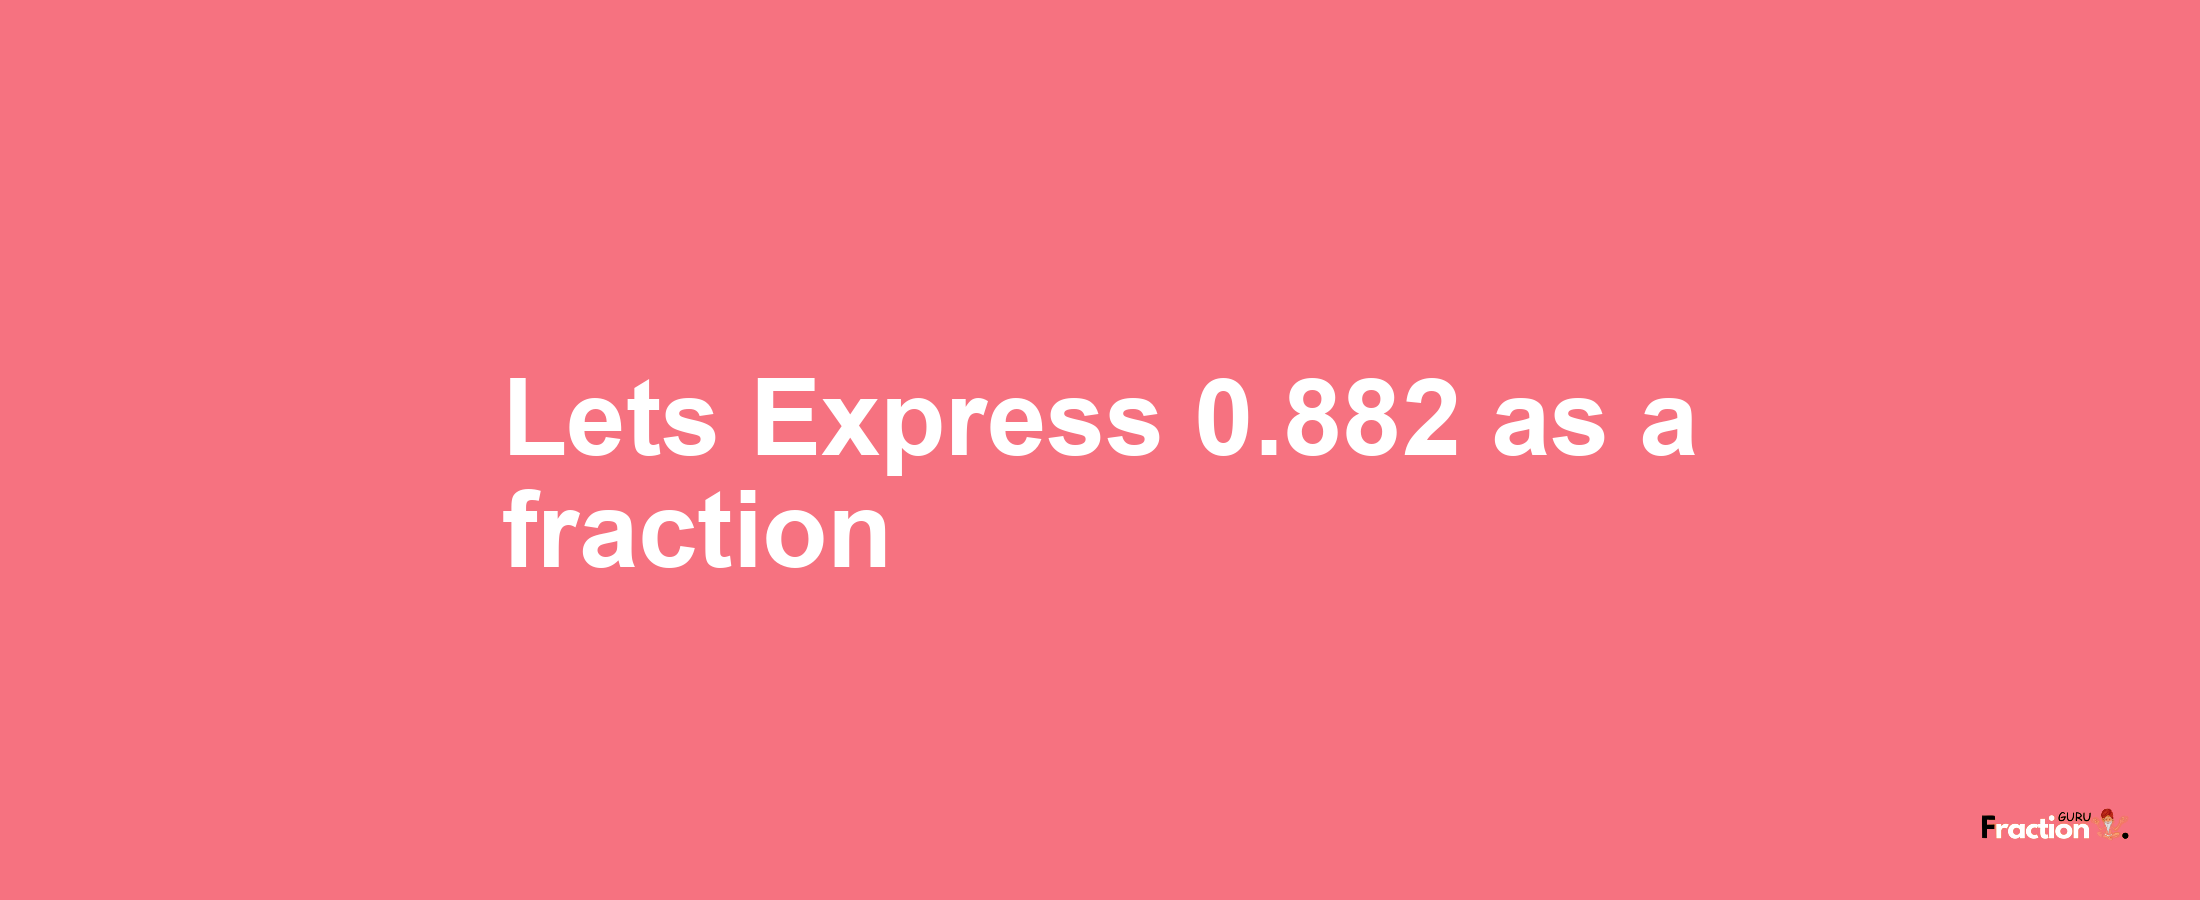 Lets Express 0.882 as afraction